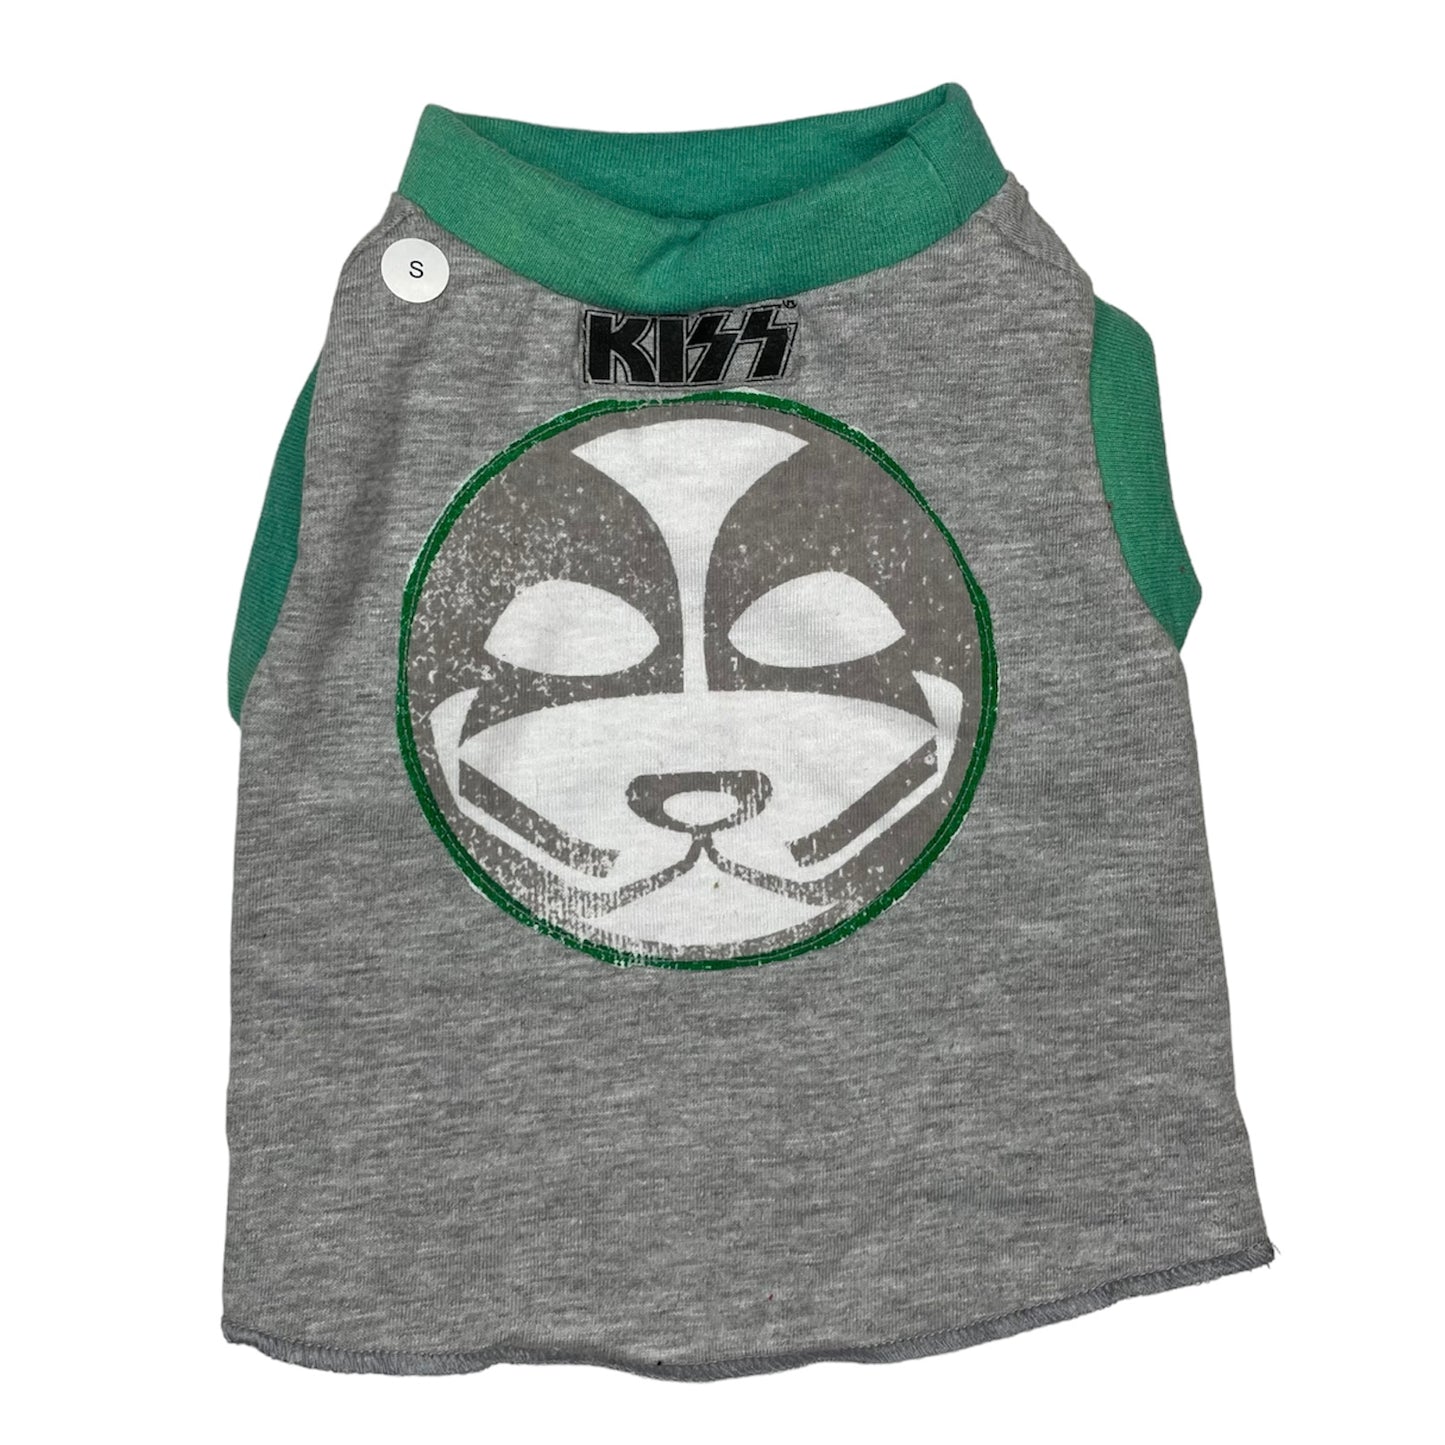 Upcycled Dog Tank - S "KISS (CATMAN) GRN"